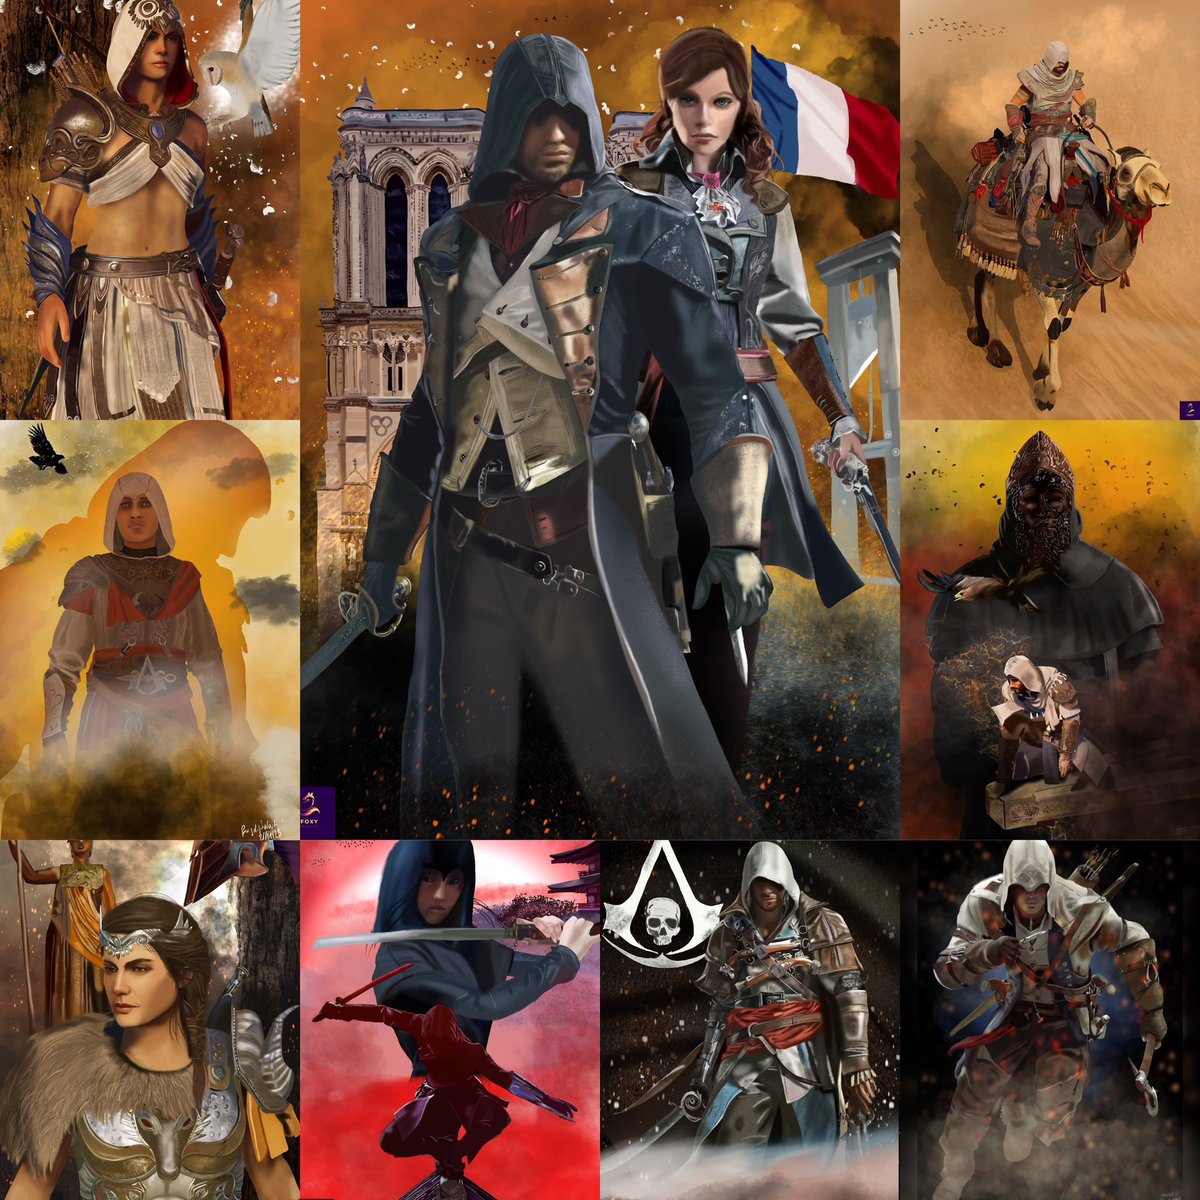 While waiting for be better and the drawing I am on, I give you my drawings that I have made, my most beautiful. Which one did you like? @UbisoftFR @Ubisoft @AssassinsFR @assassinscreed #AssassinsCreed #Fanart #ACFinest #DigitalArtist